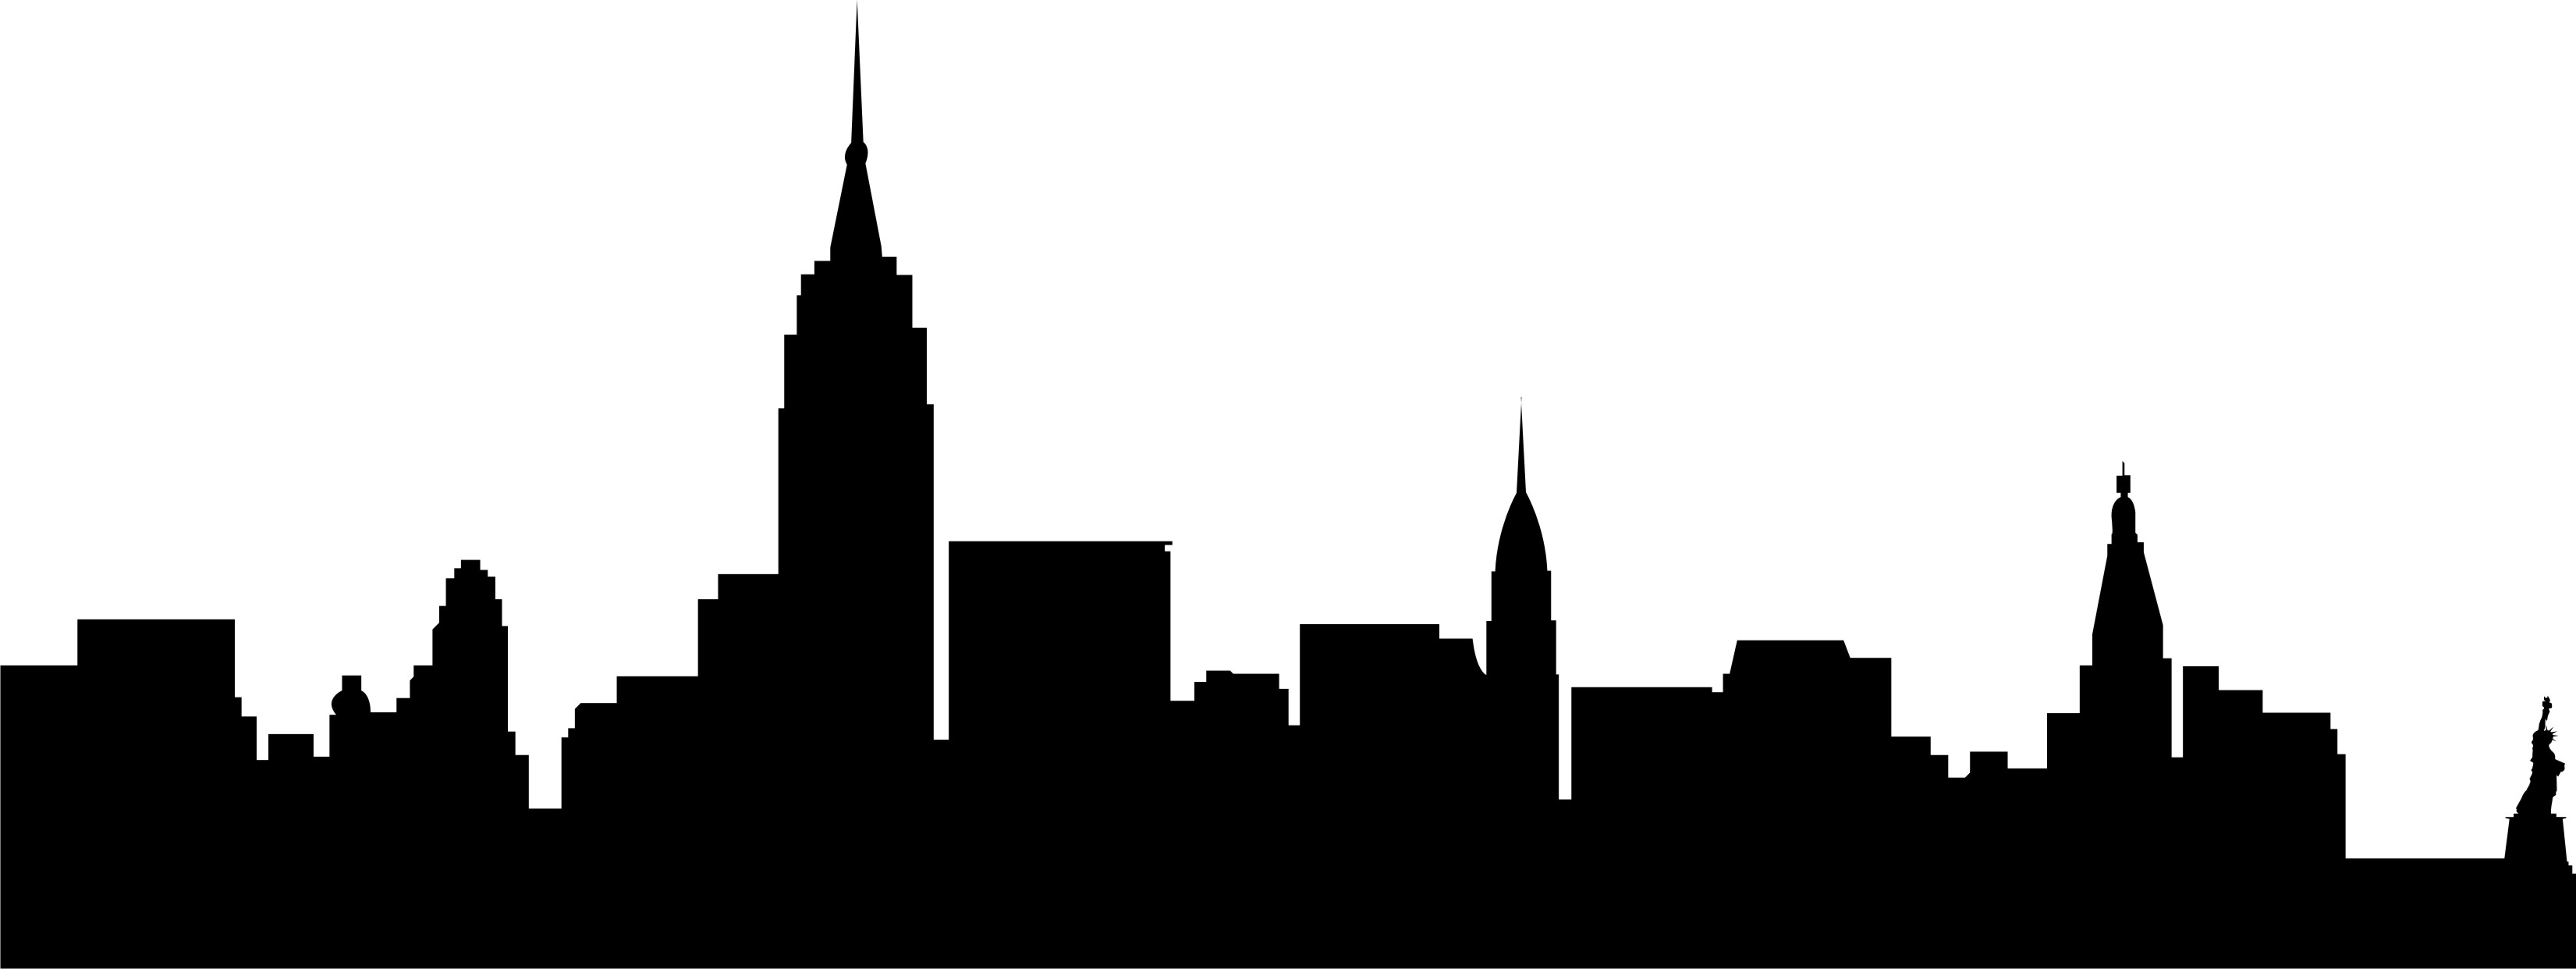 City Background Black And White Clipart.